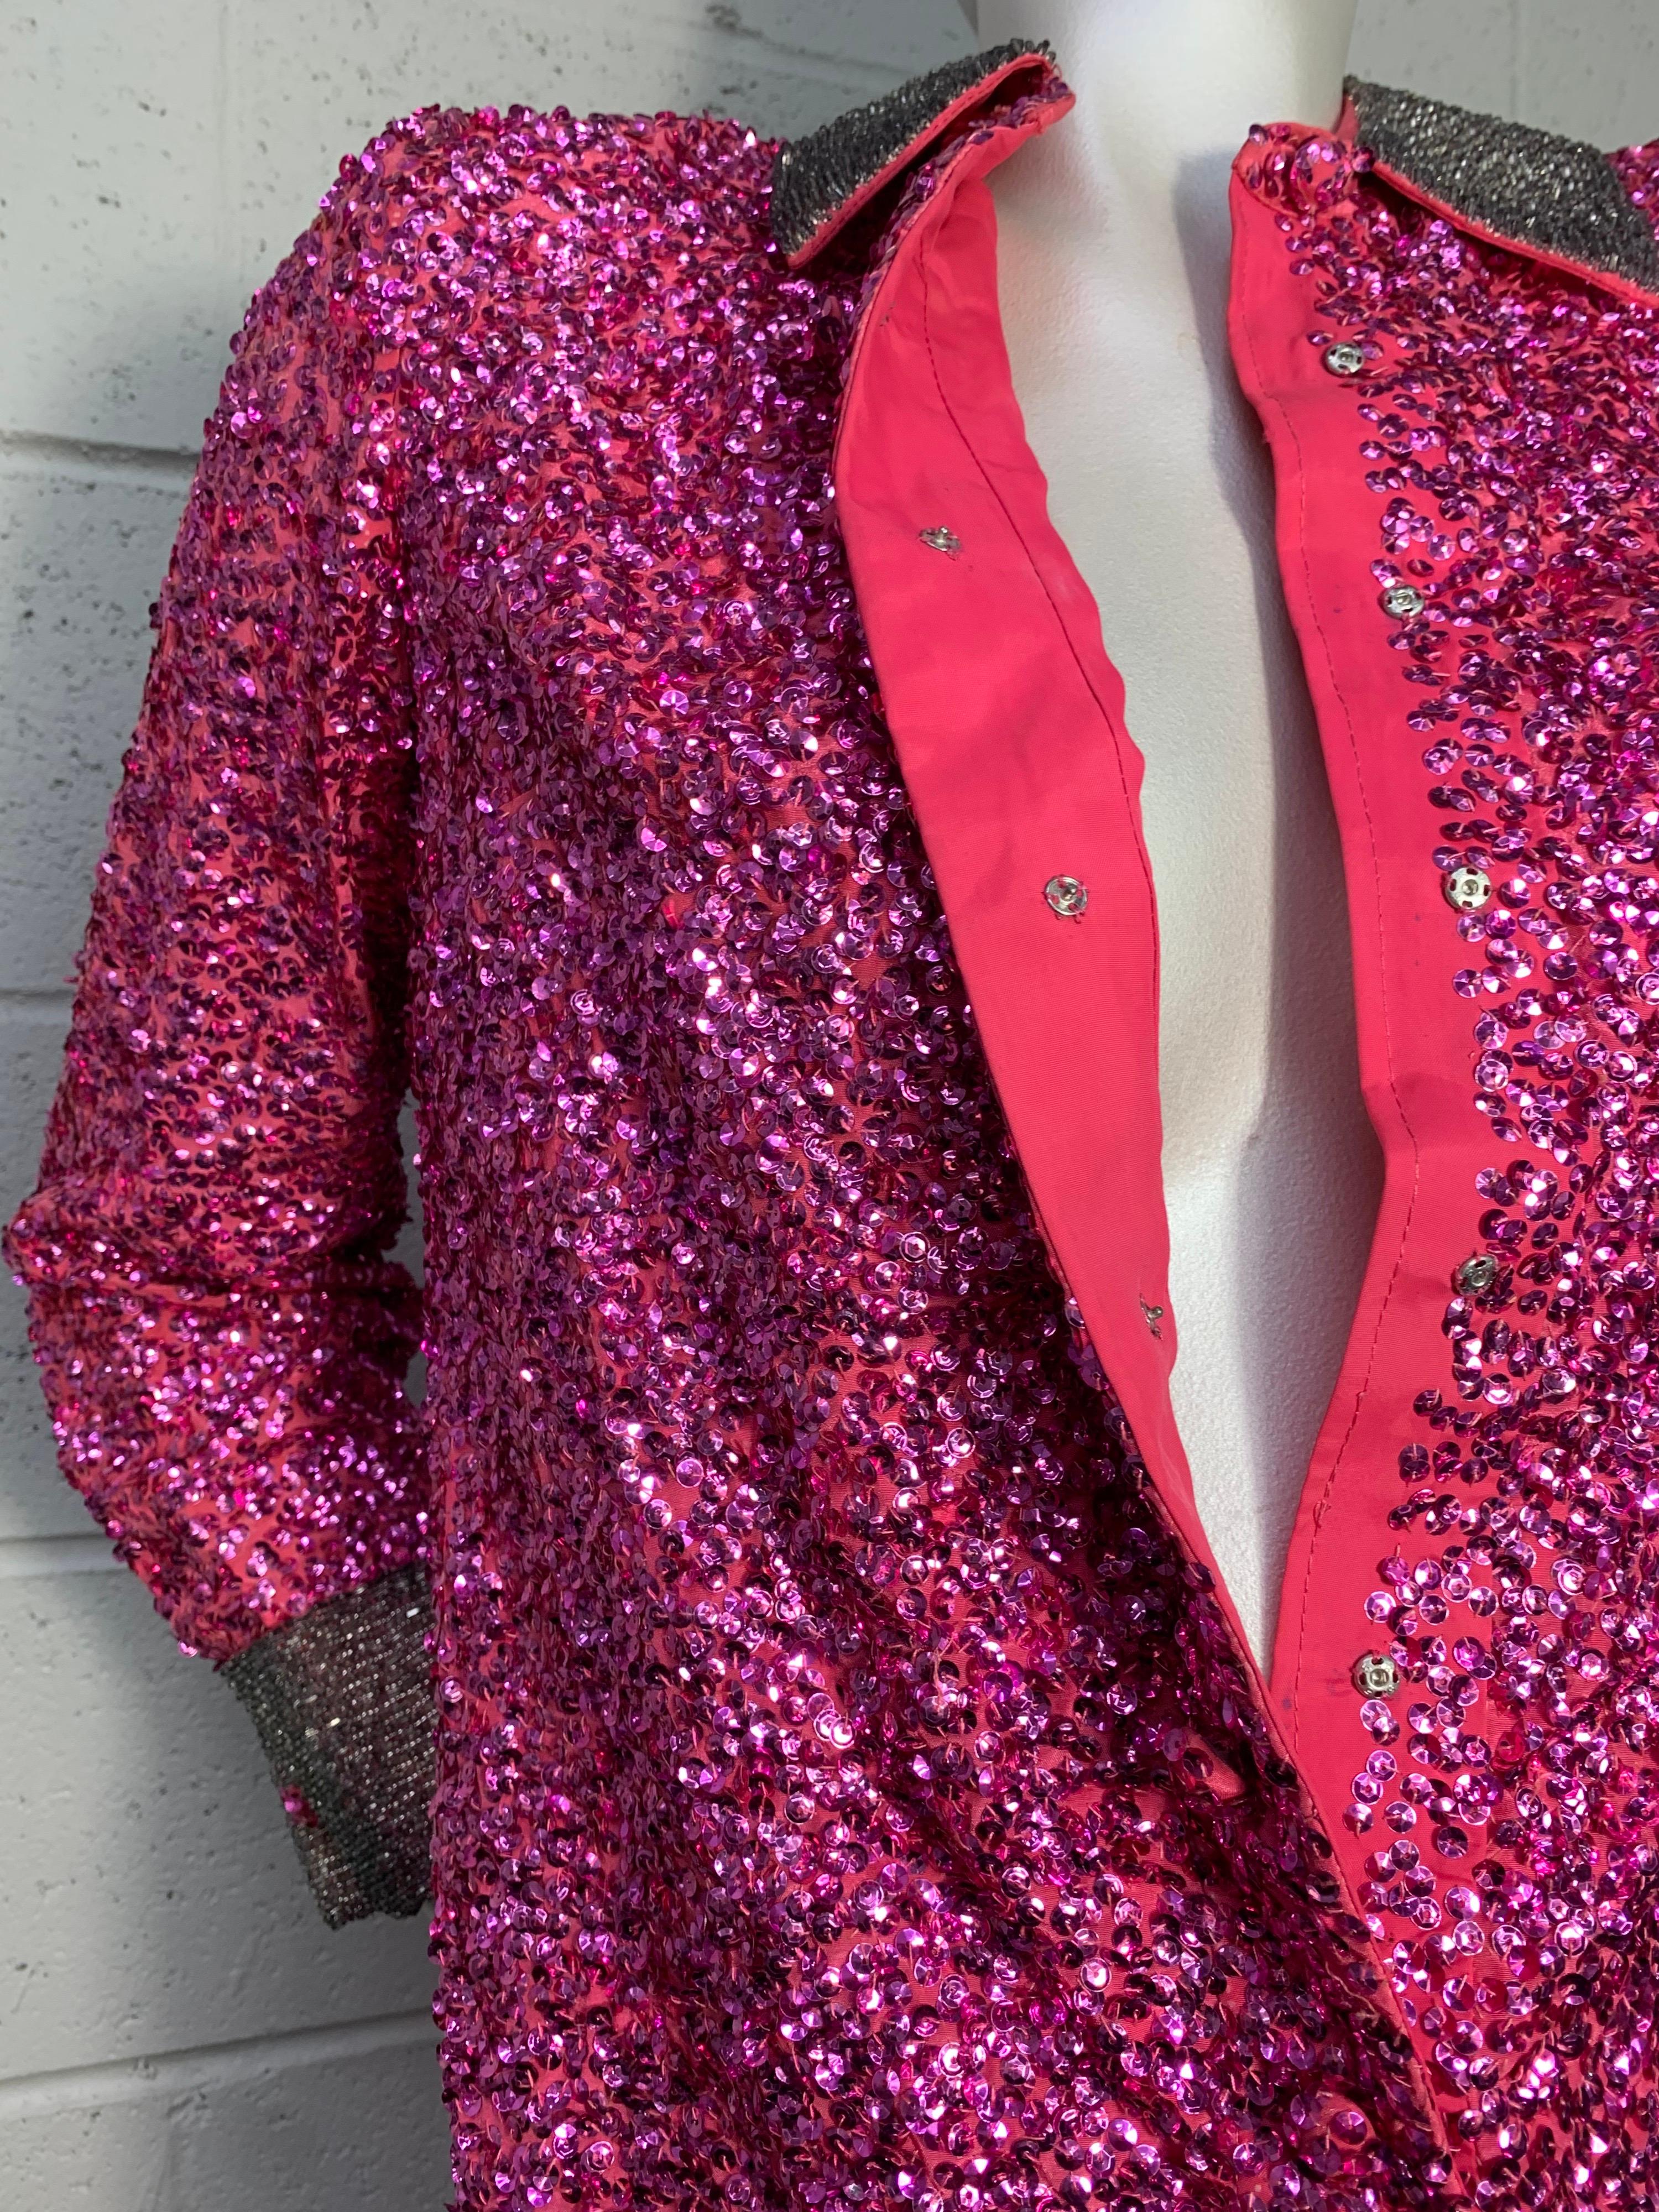 1960s Vivid Fuchsia Sequined Mod Mini Dress w/ Silver Beaded Collar and Cuffs For Sale 8